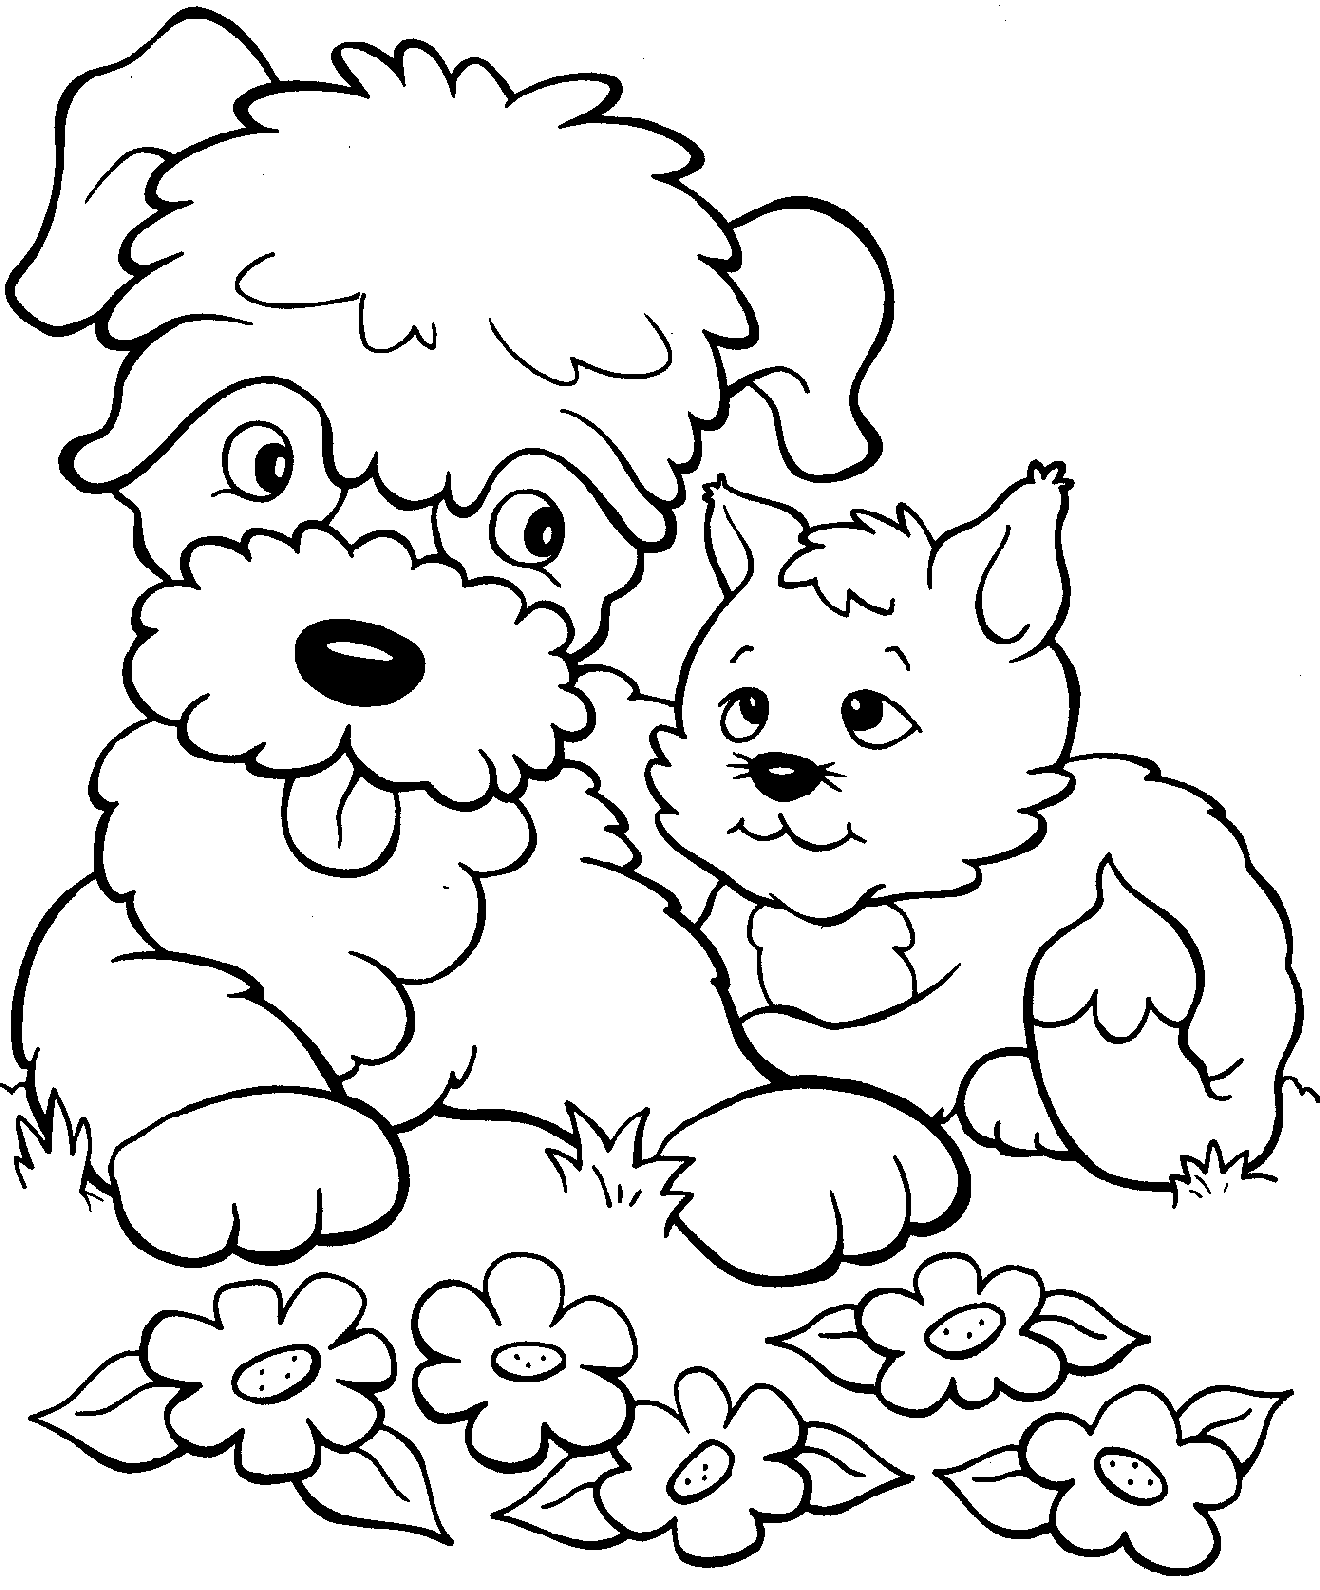 20-kitty-picture-to-color-free-coloring-pages